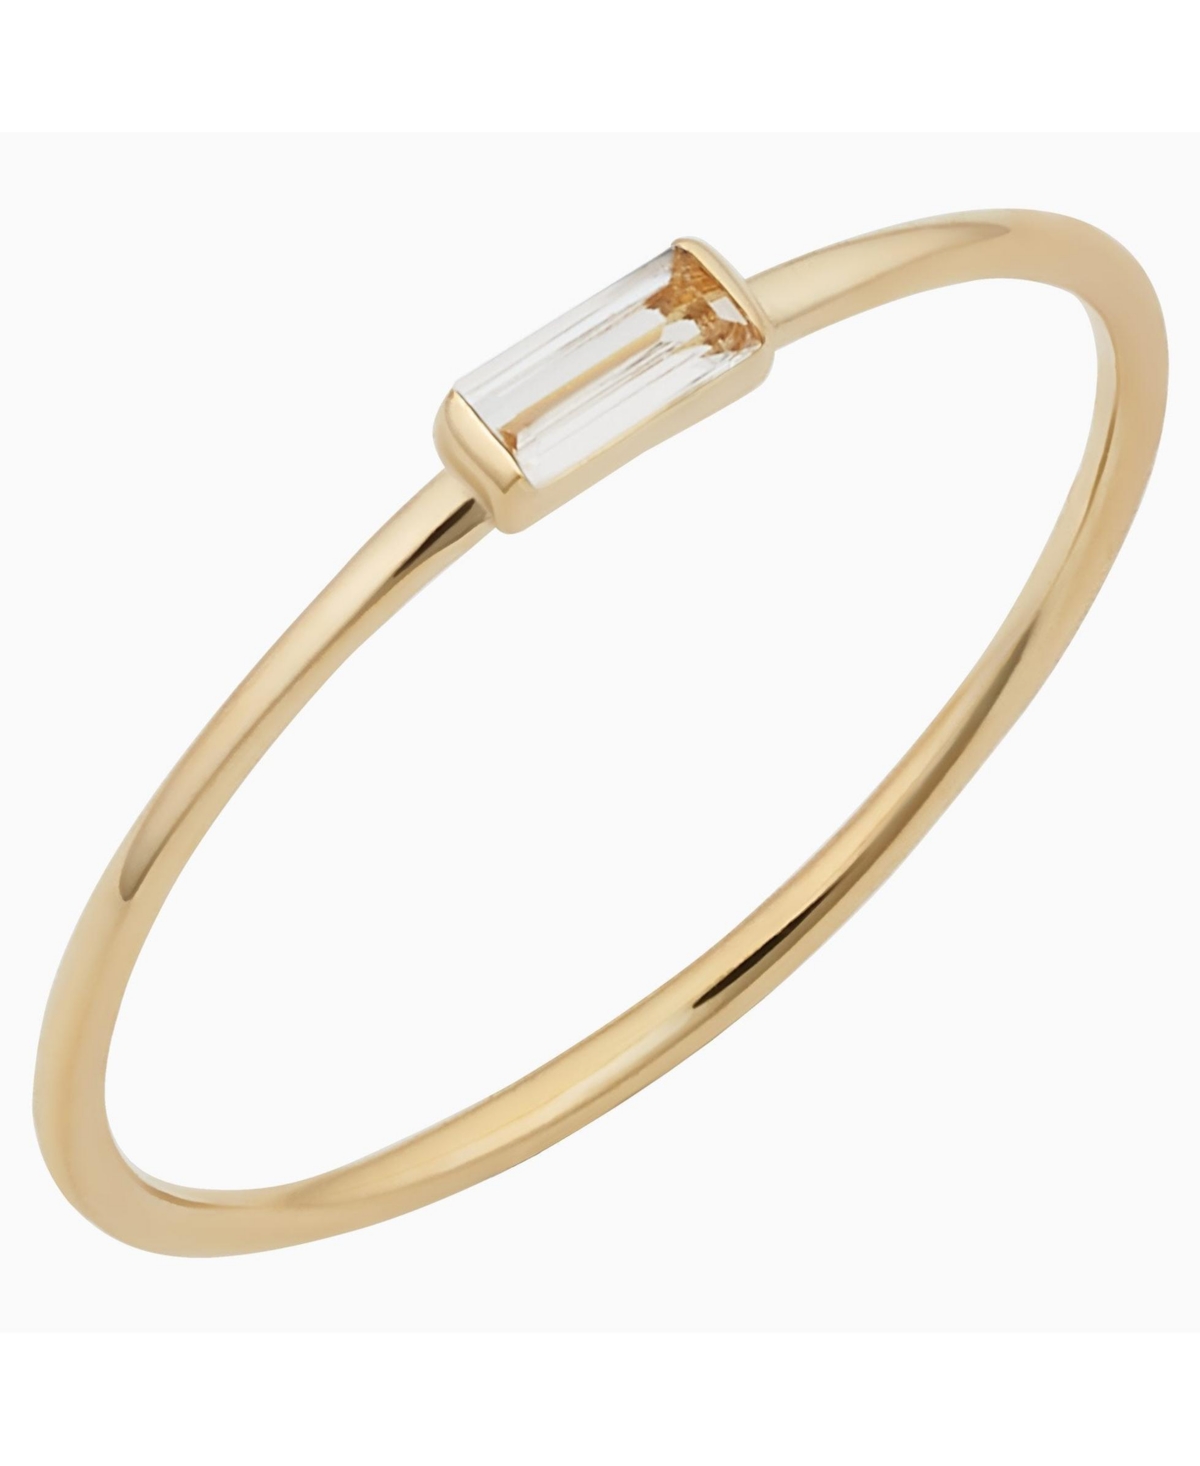 ORADINA FRESCO BAGUETTE RING IN 14K YELLOW GOLD- 9 INCHES